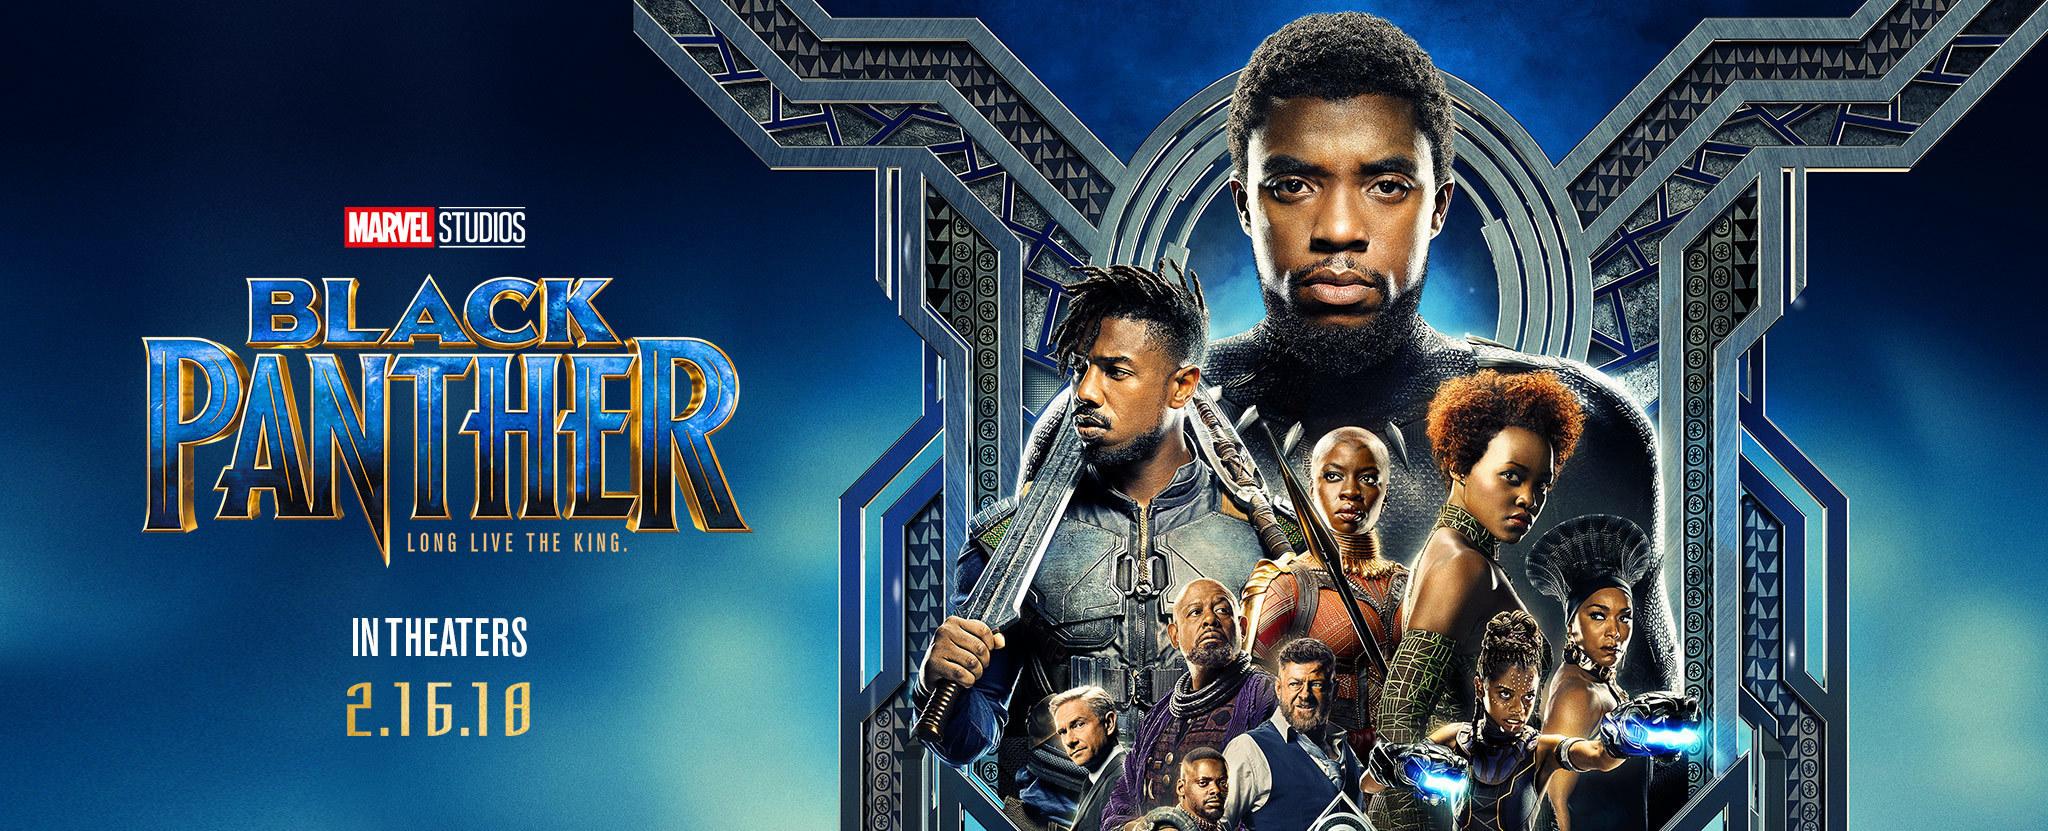 Black Panther Movie Official Poster Wallpapers